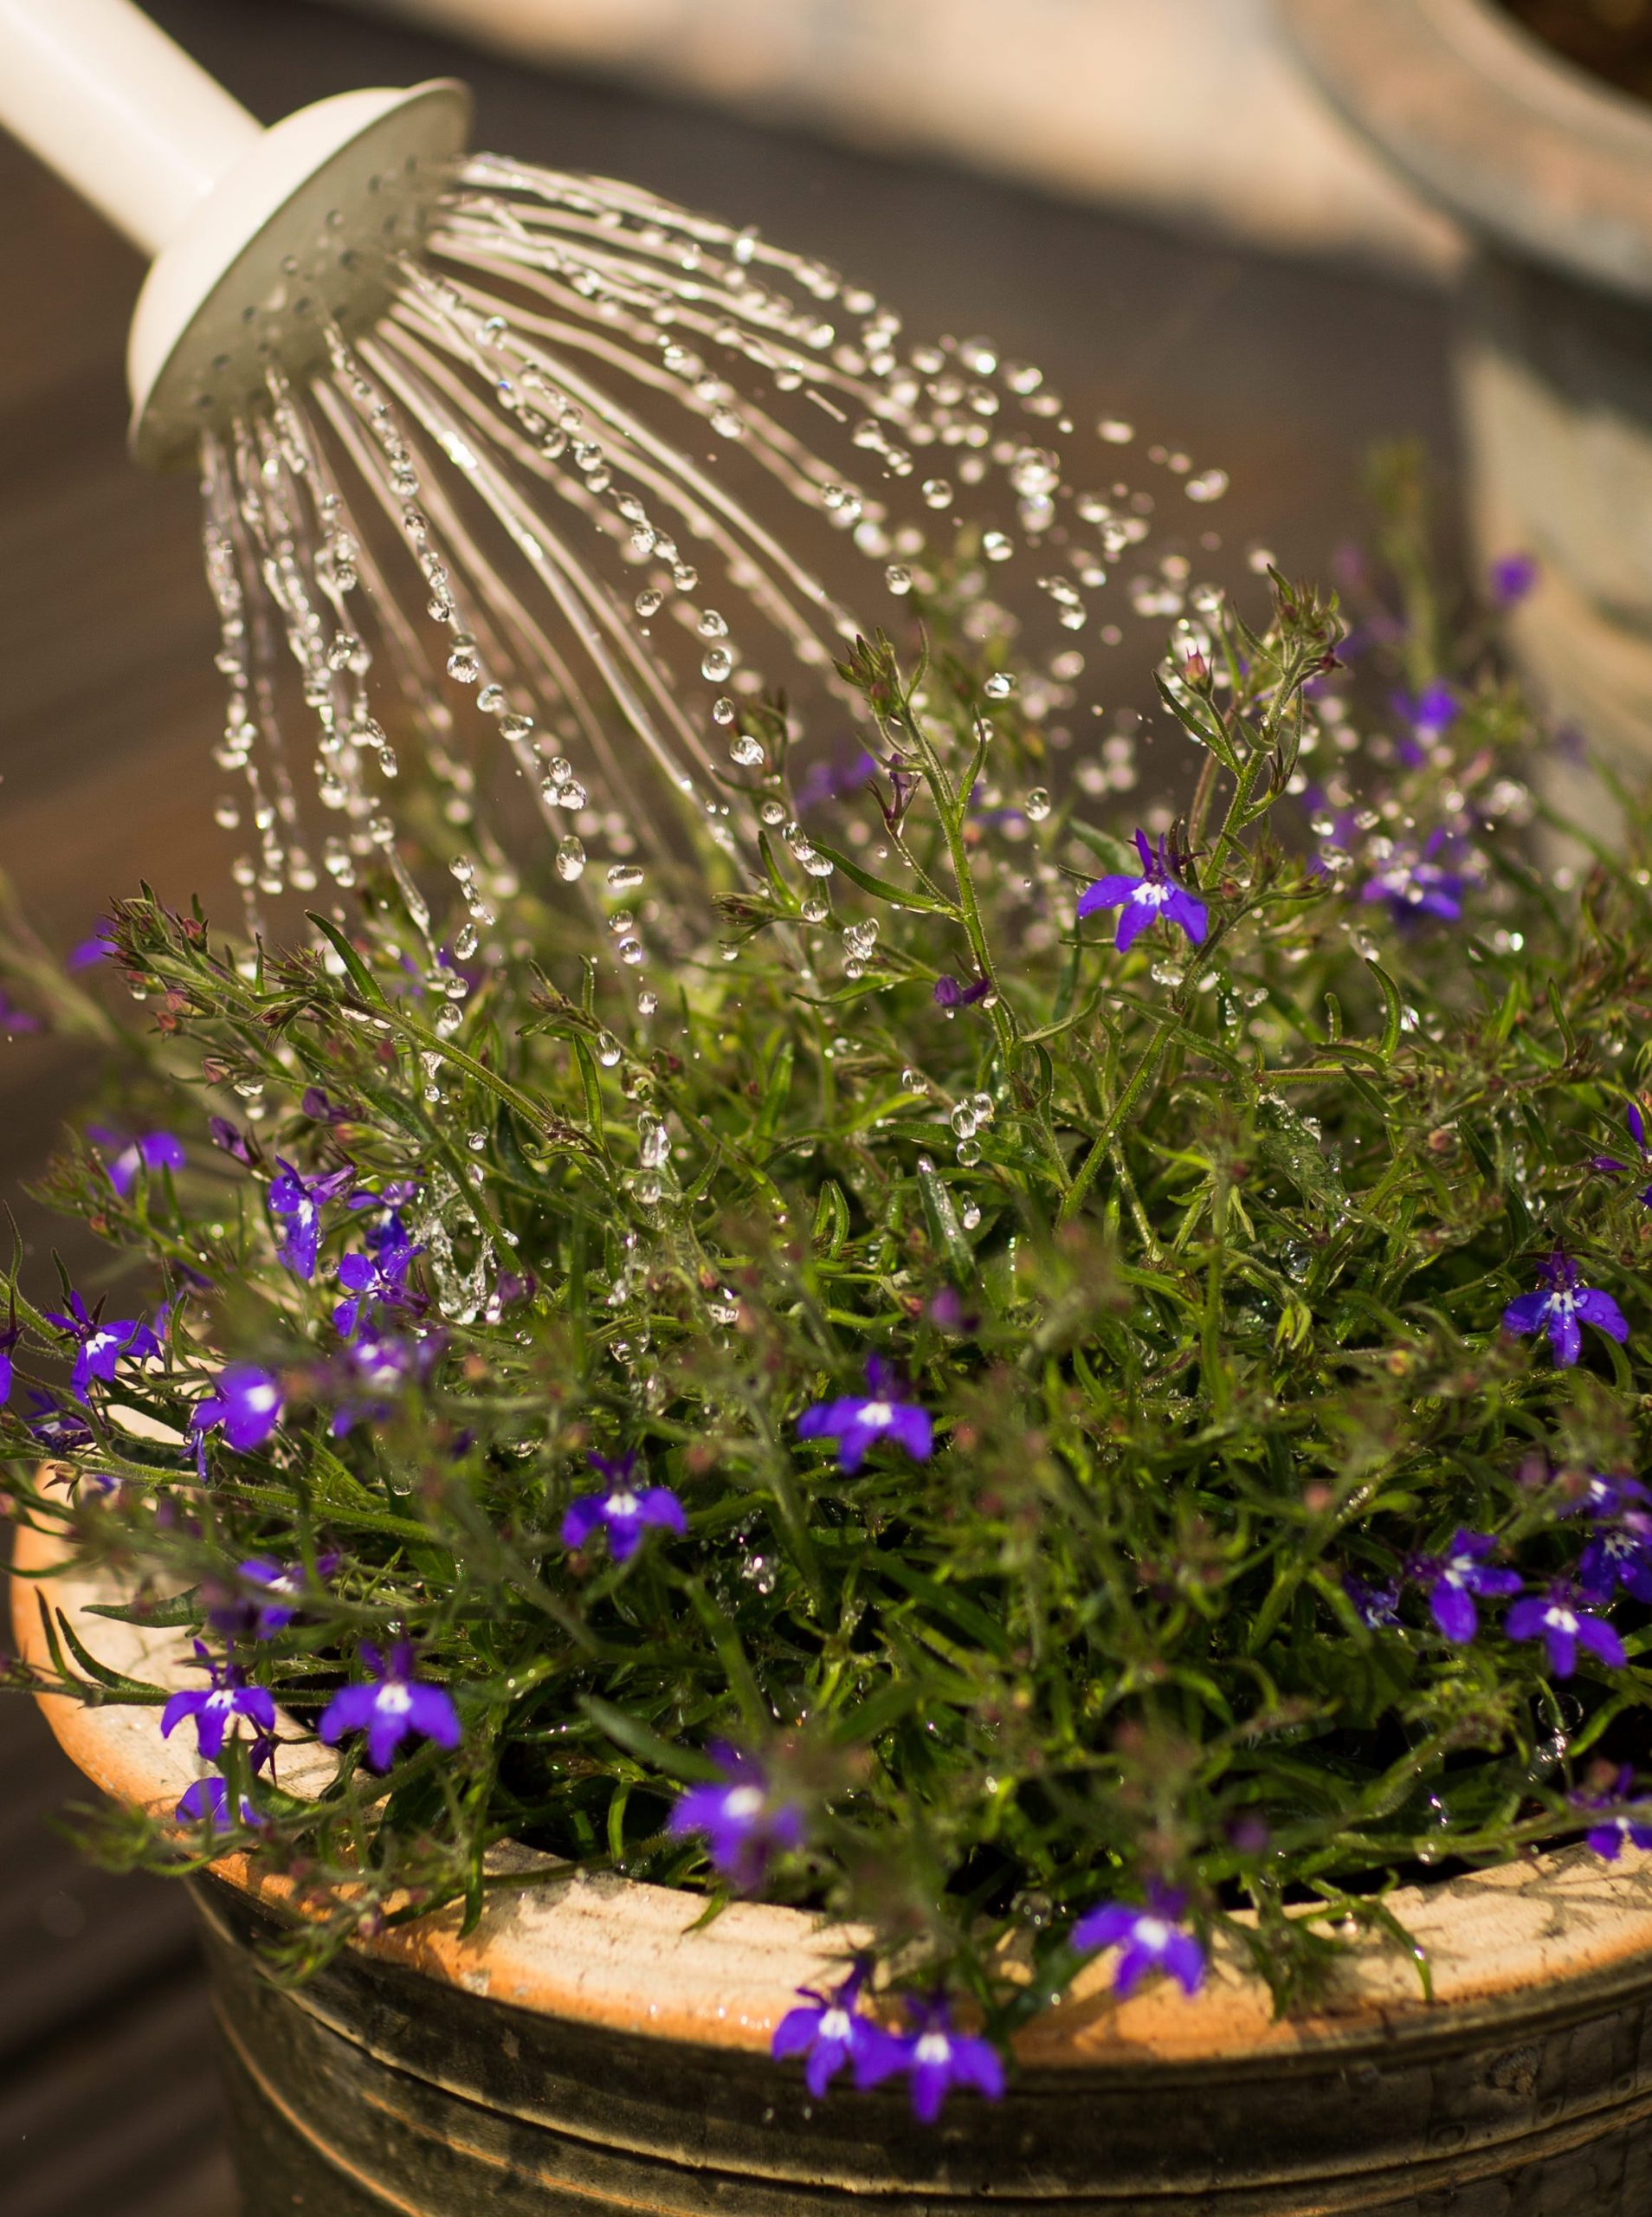 Good Earth Plant Company's plant stylists get asked about watering more than any other topic. Photo: Torsten Dettlaff/Pexels